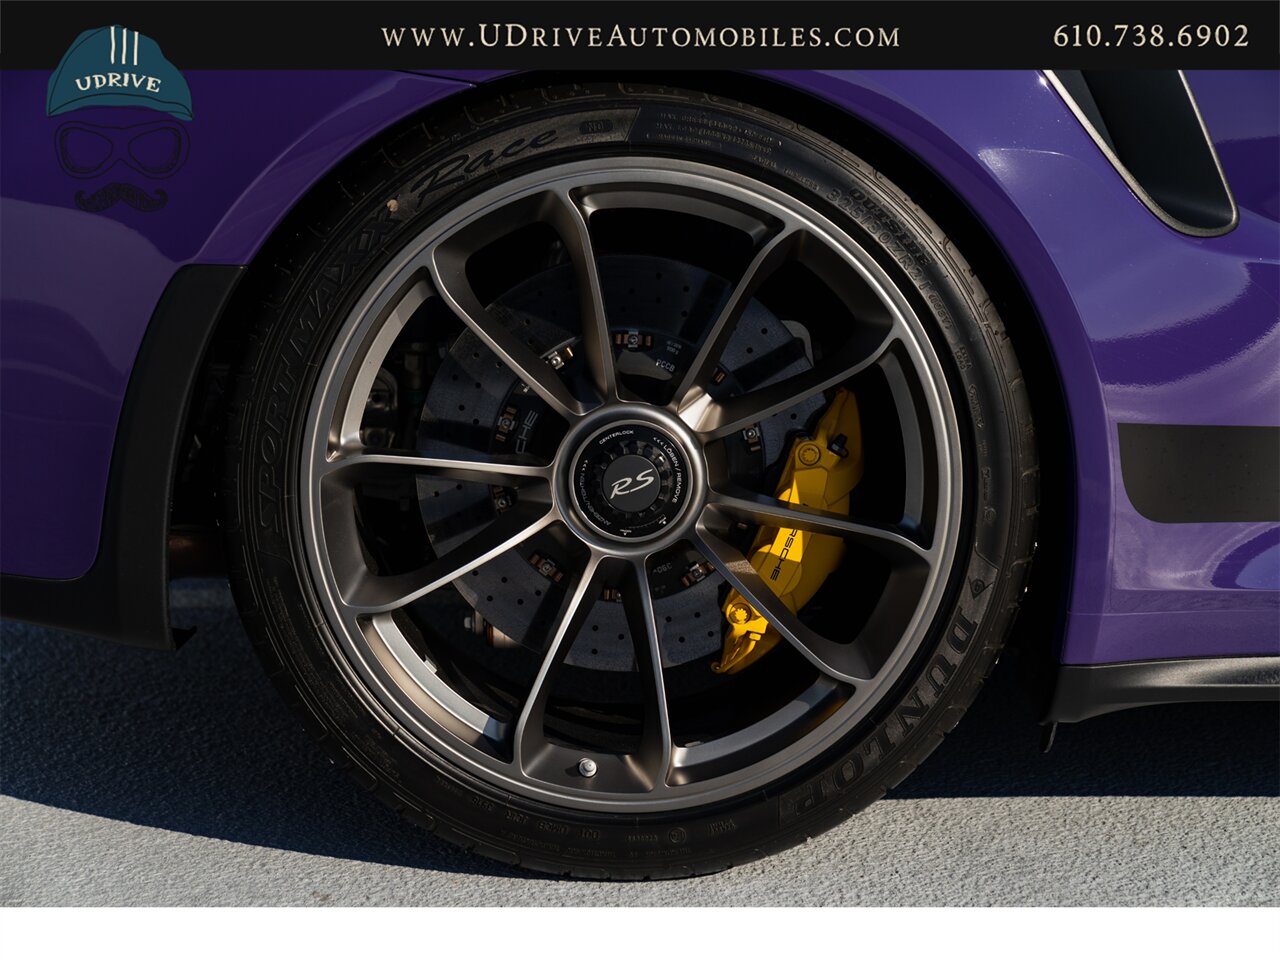 2016 Porsche 911 GT3 RS  1k Miles PCCB Front Axle Lift Yellow Stitching - Photo 71 - West Chester, PA 19382